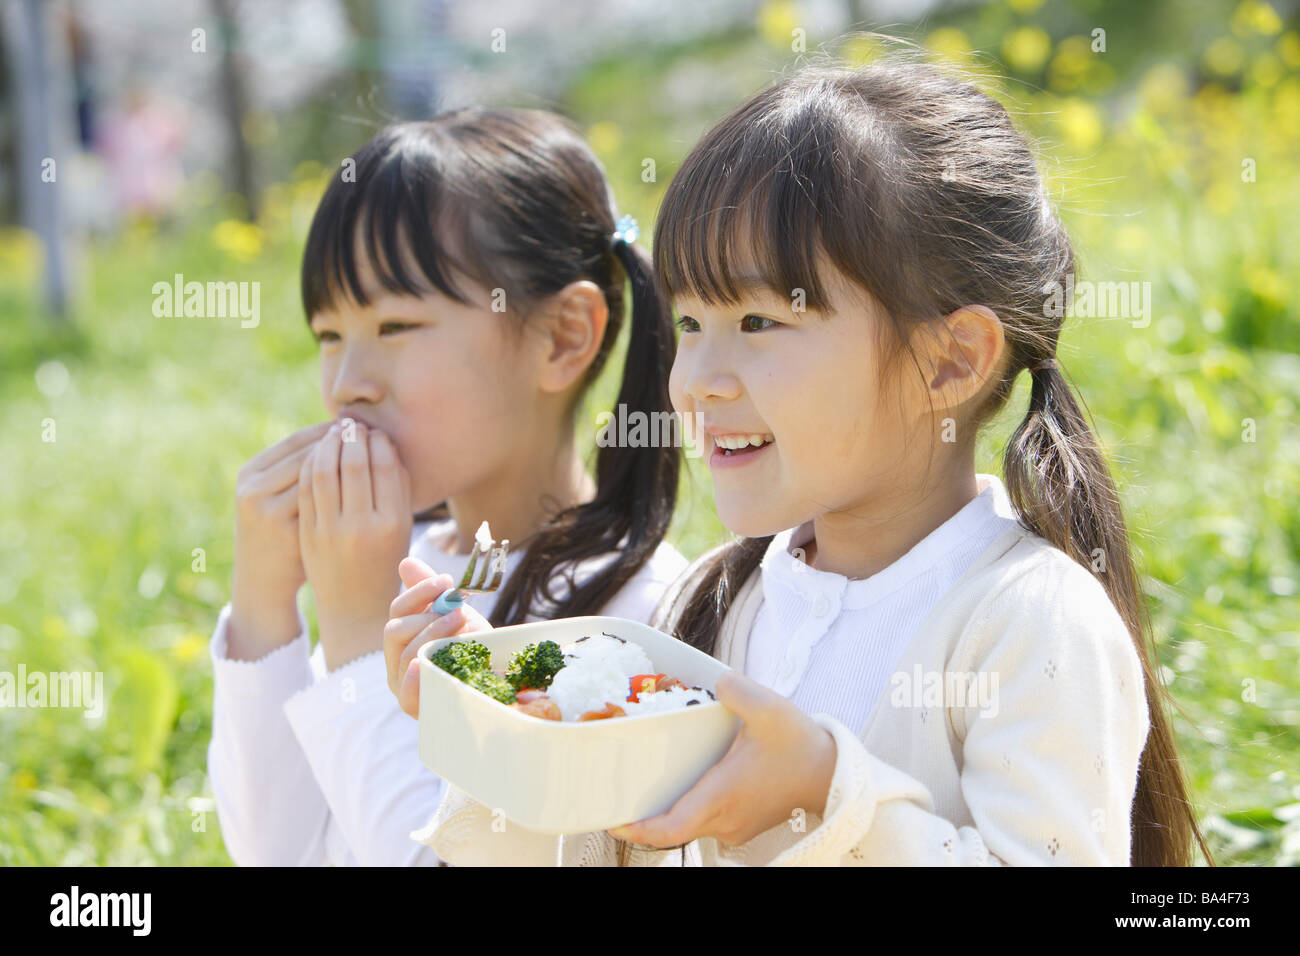 Japanese girls eating lunch together Stock Photo